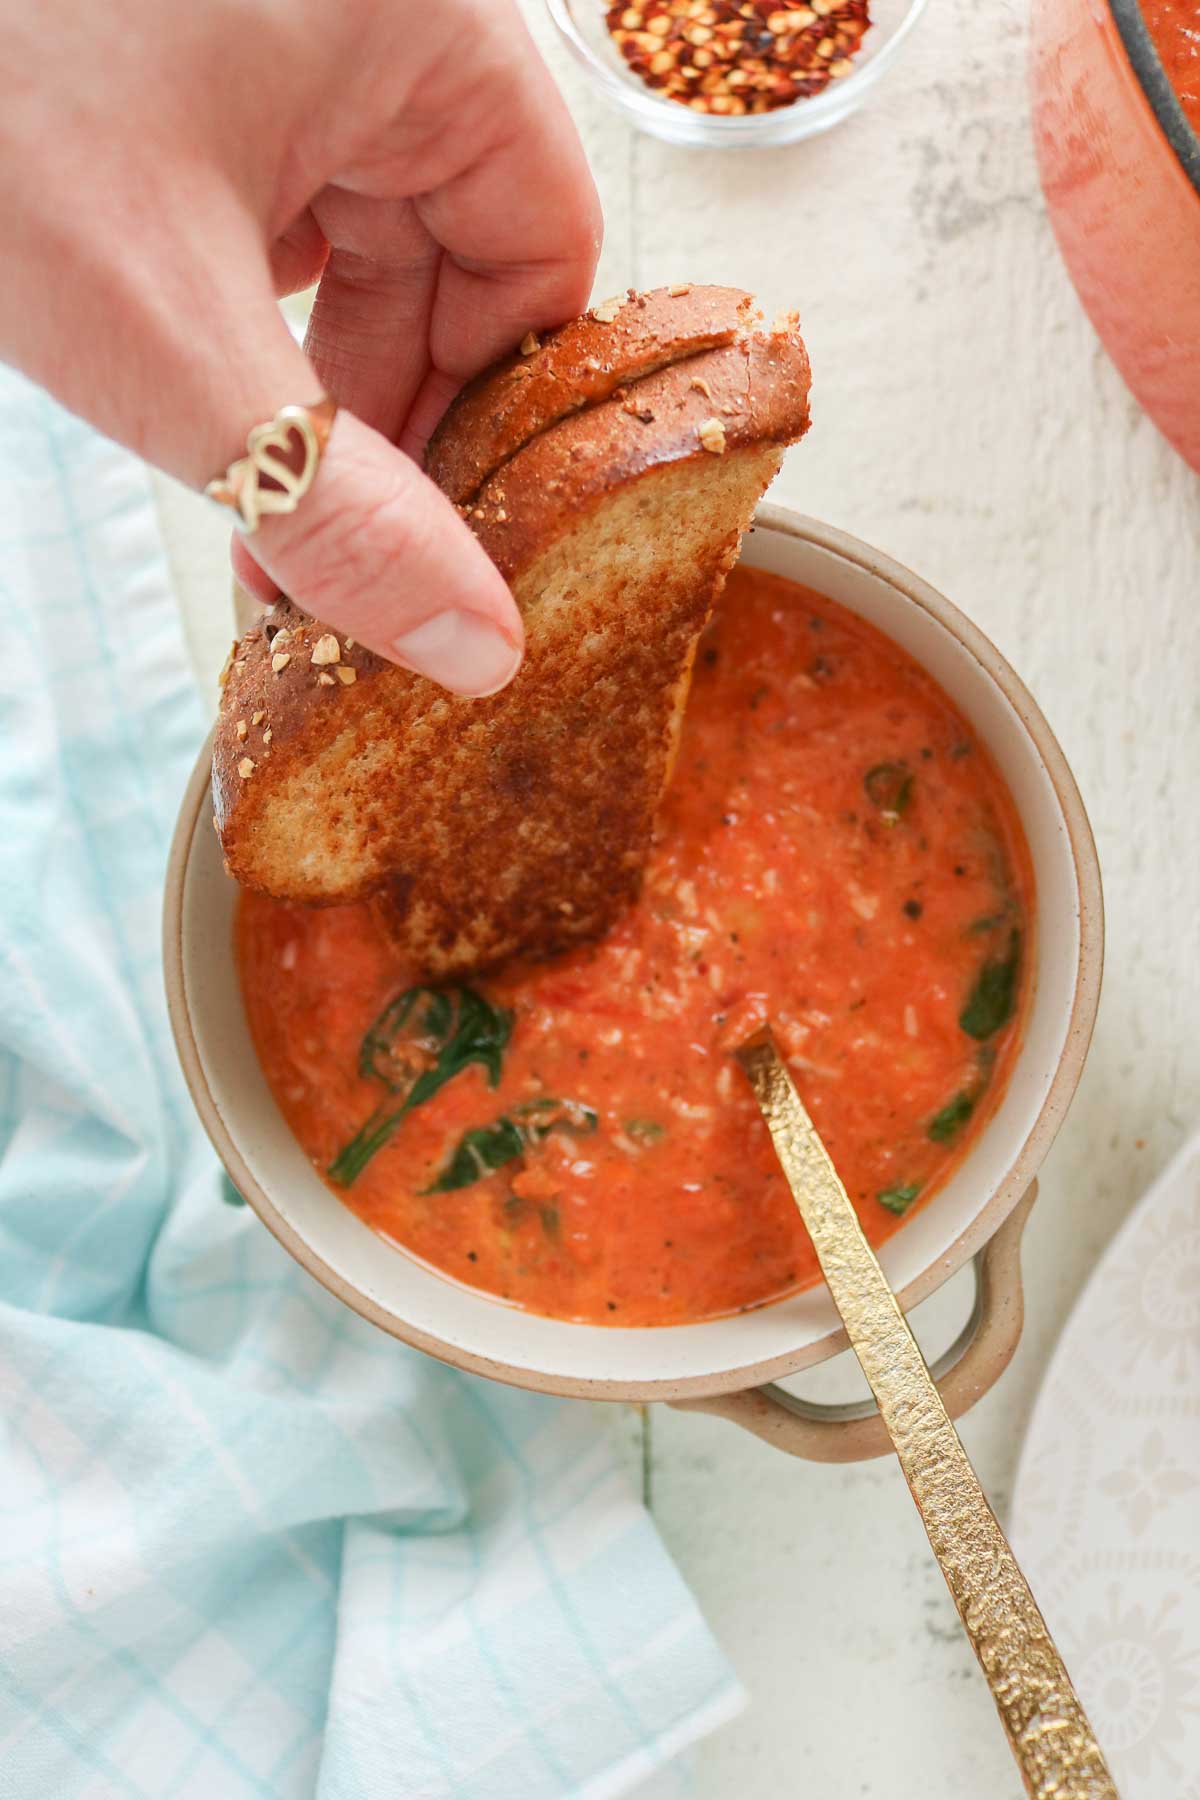 Hand dipping half of a grilled cheese sandwich into a bowl of soup.